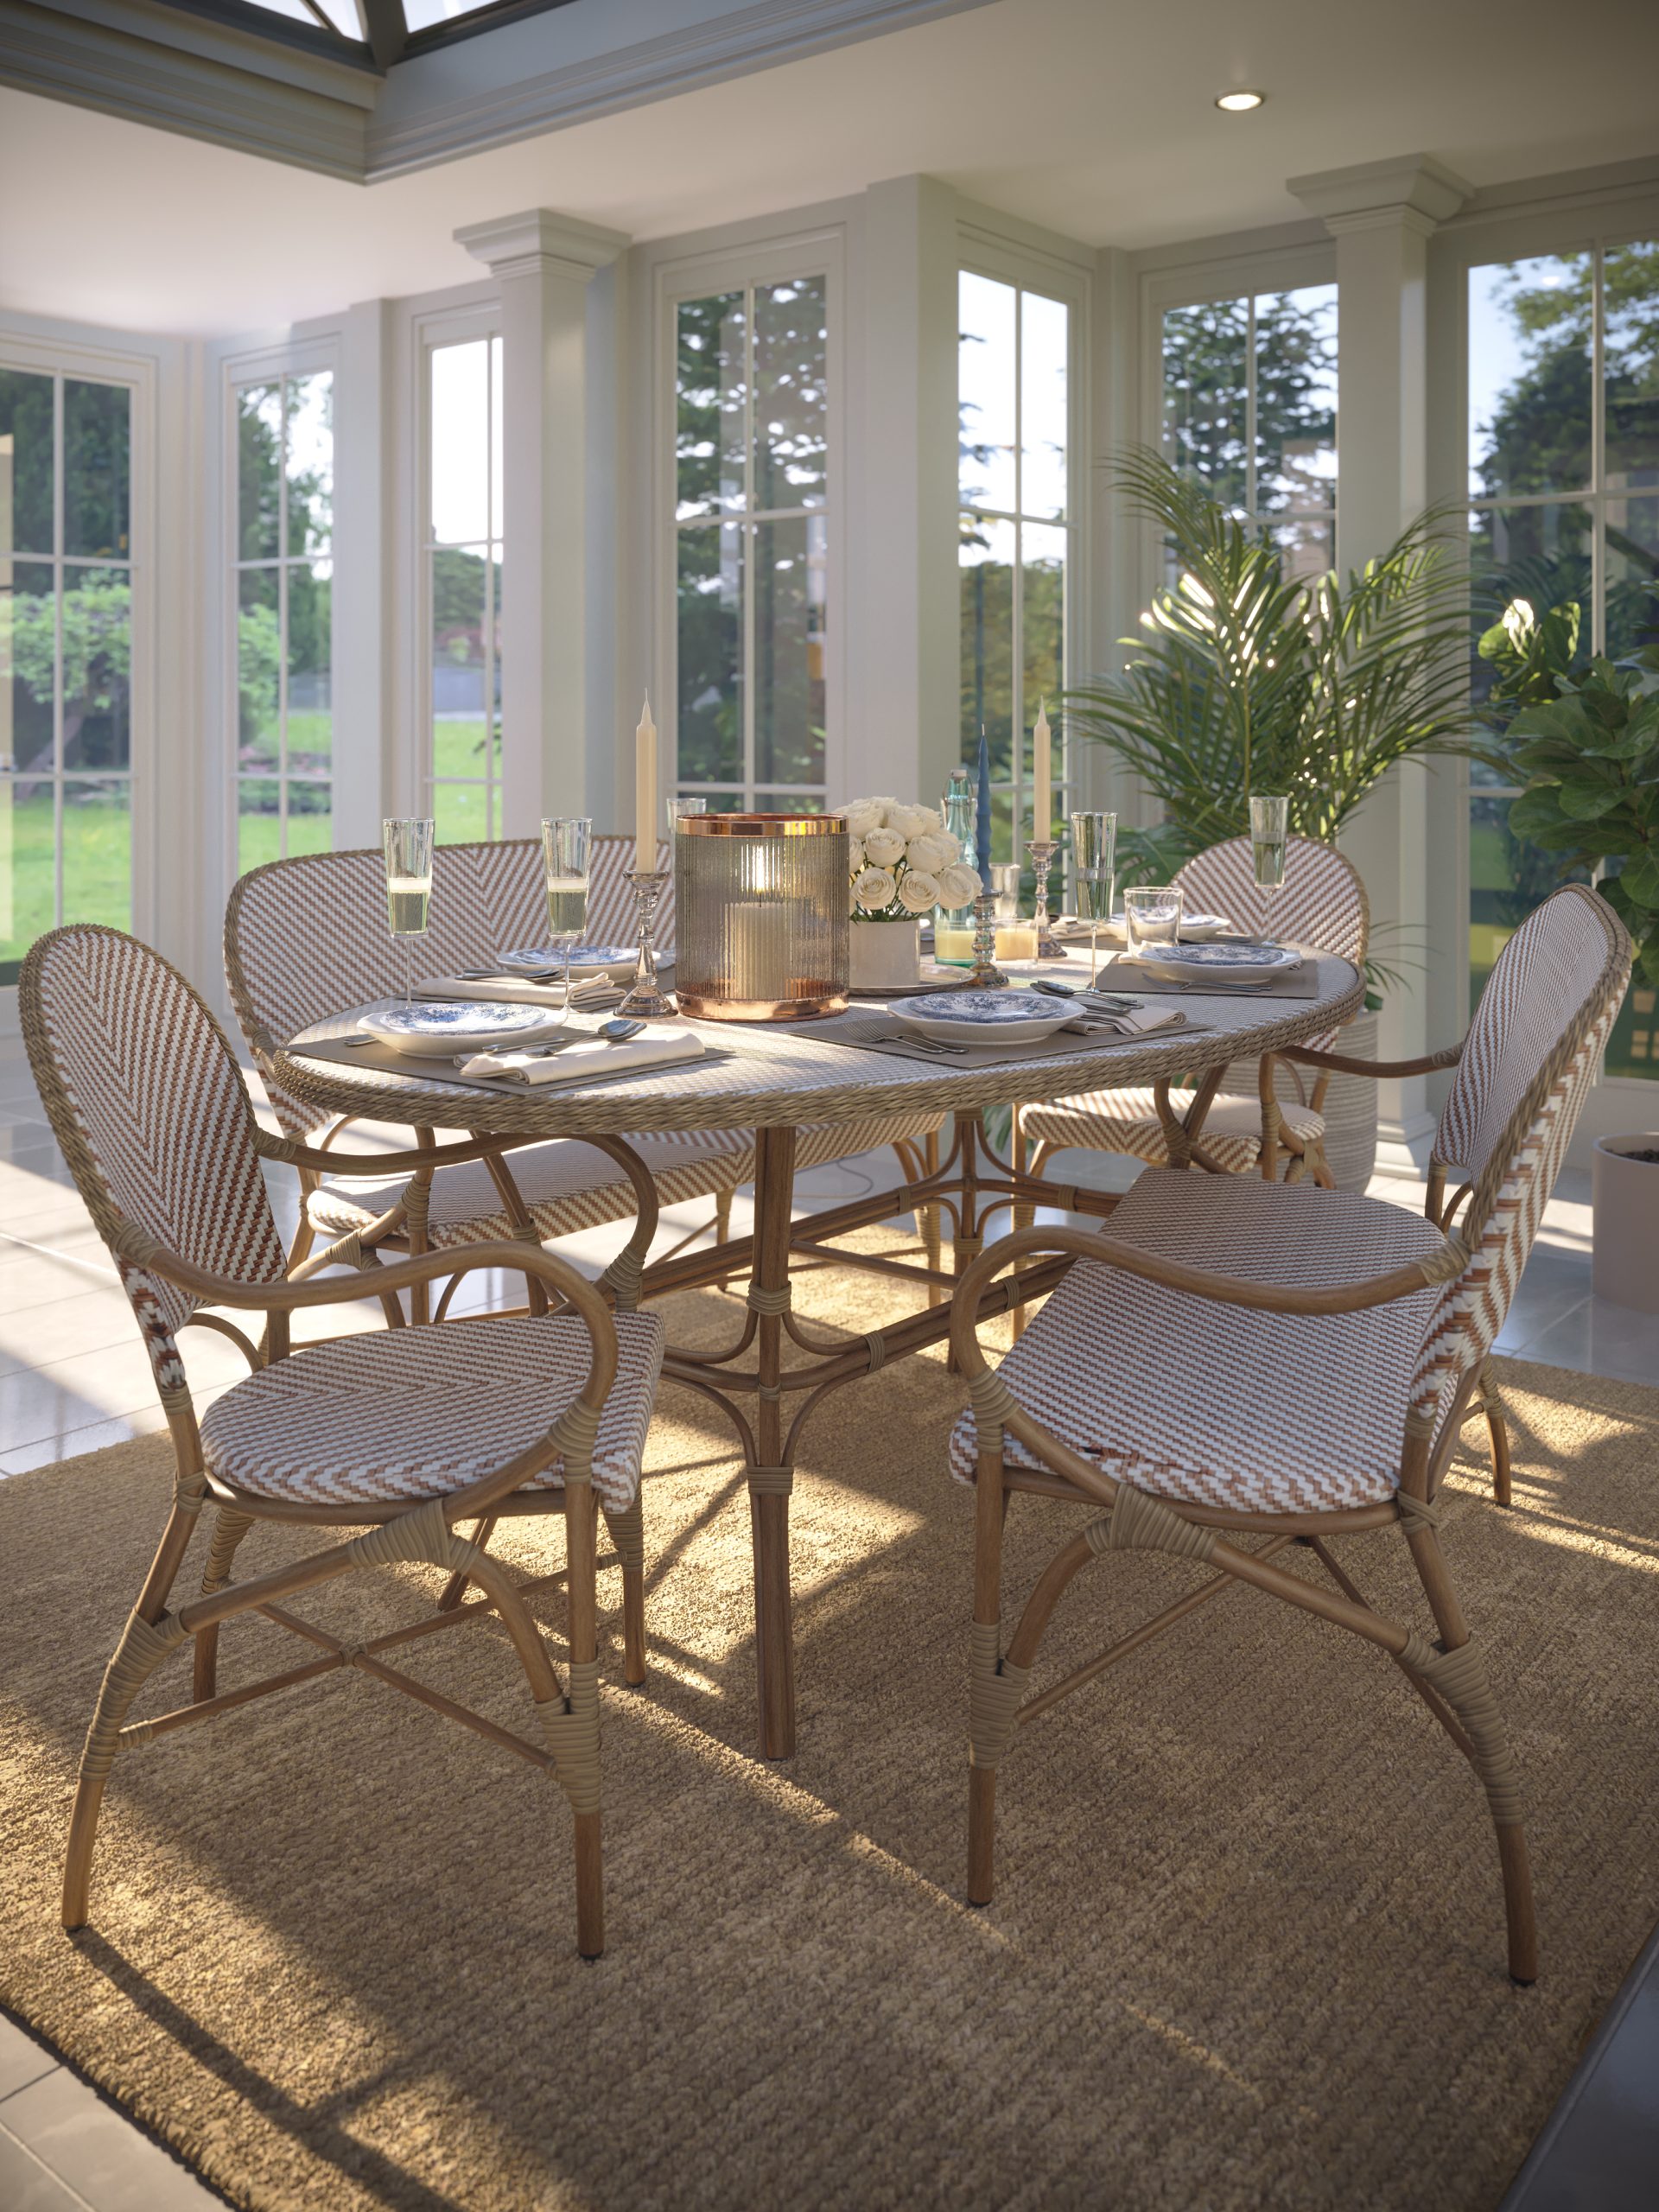 Laura Ashley Rattan Furniture - Riviera Dining Set with Benches